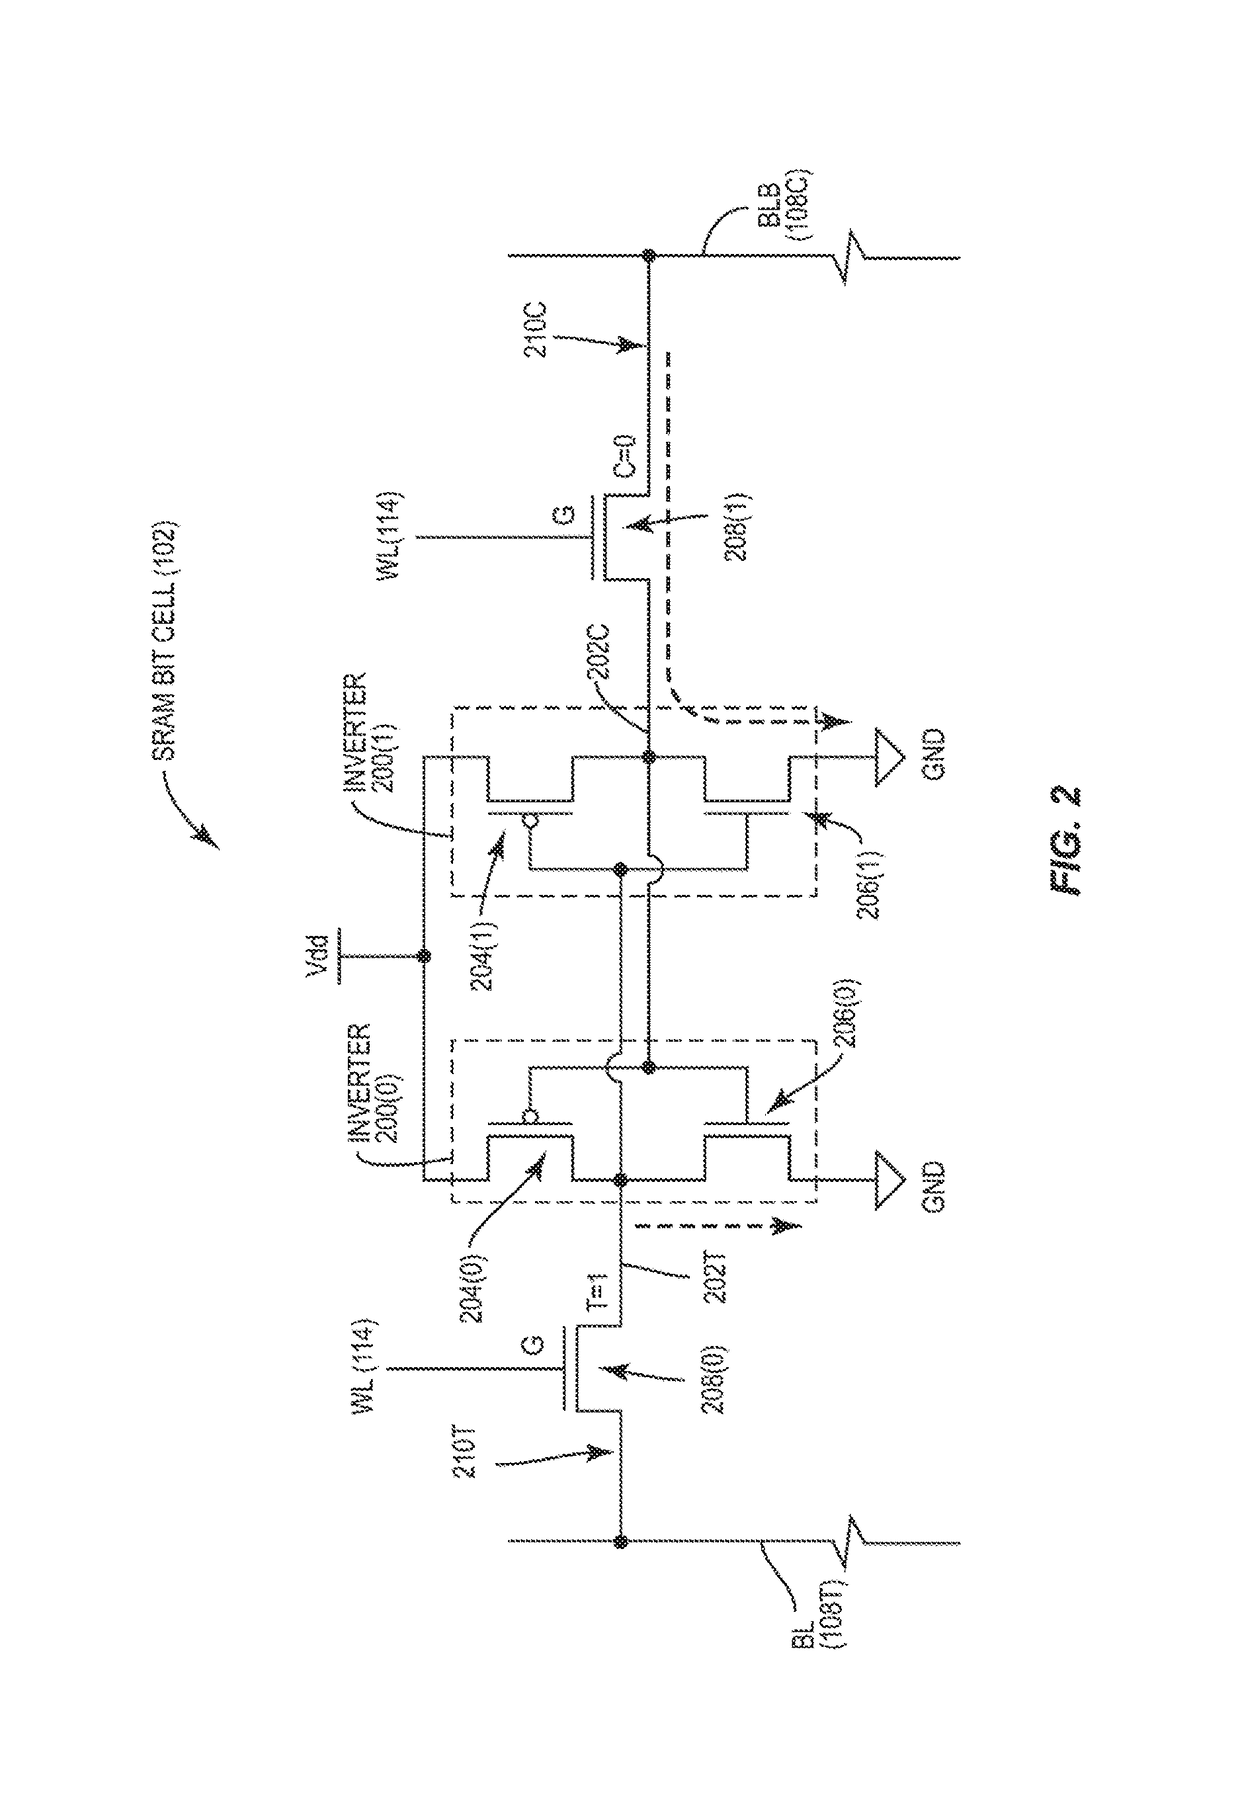 Separate read and write address decoding in a memory system to support simultaneous memory read and write operations